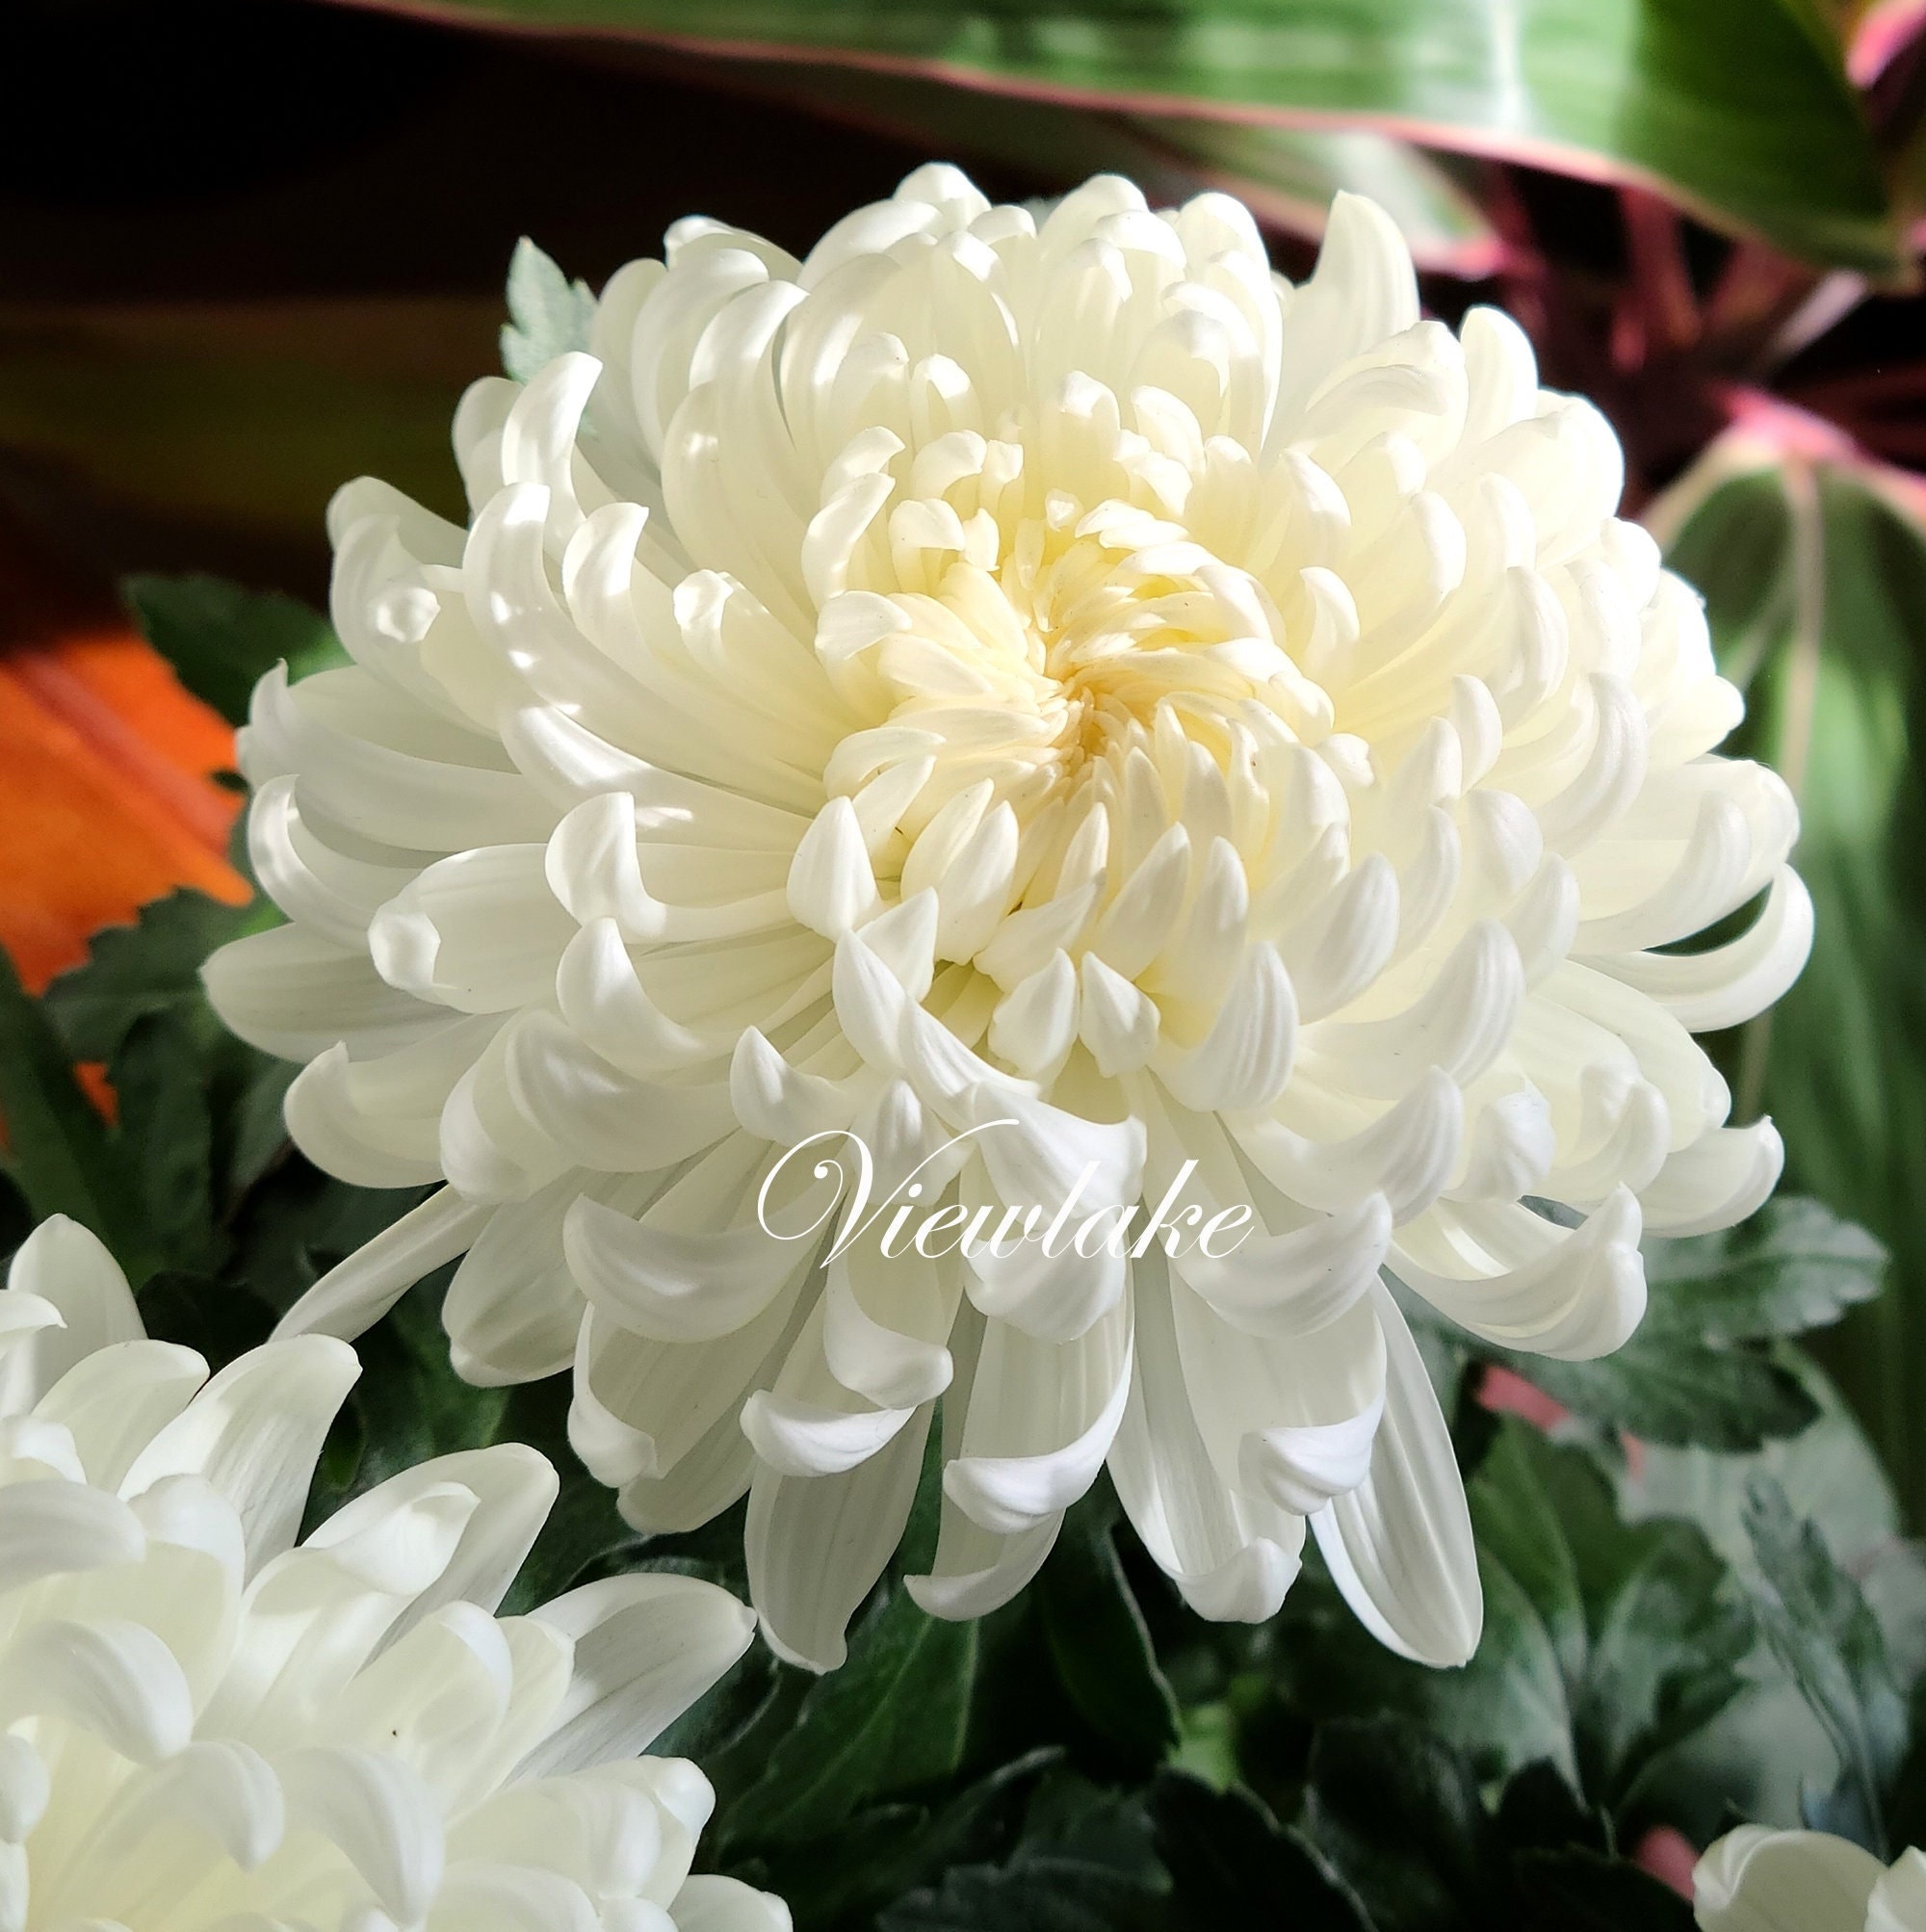 Snowball Chrysanthemum Plants for Magnificent Large White Flowers